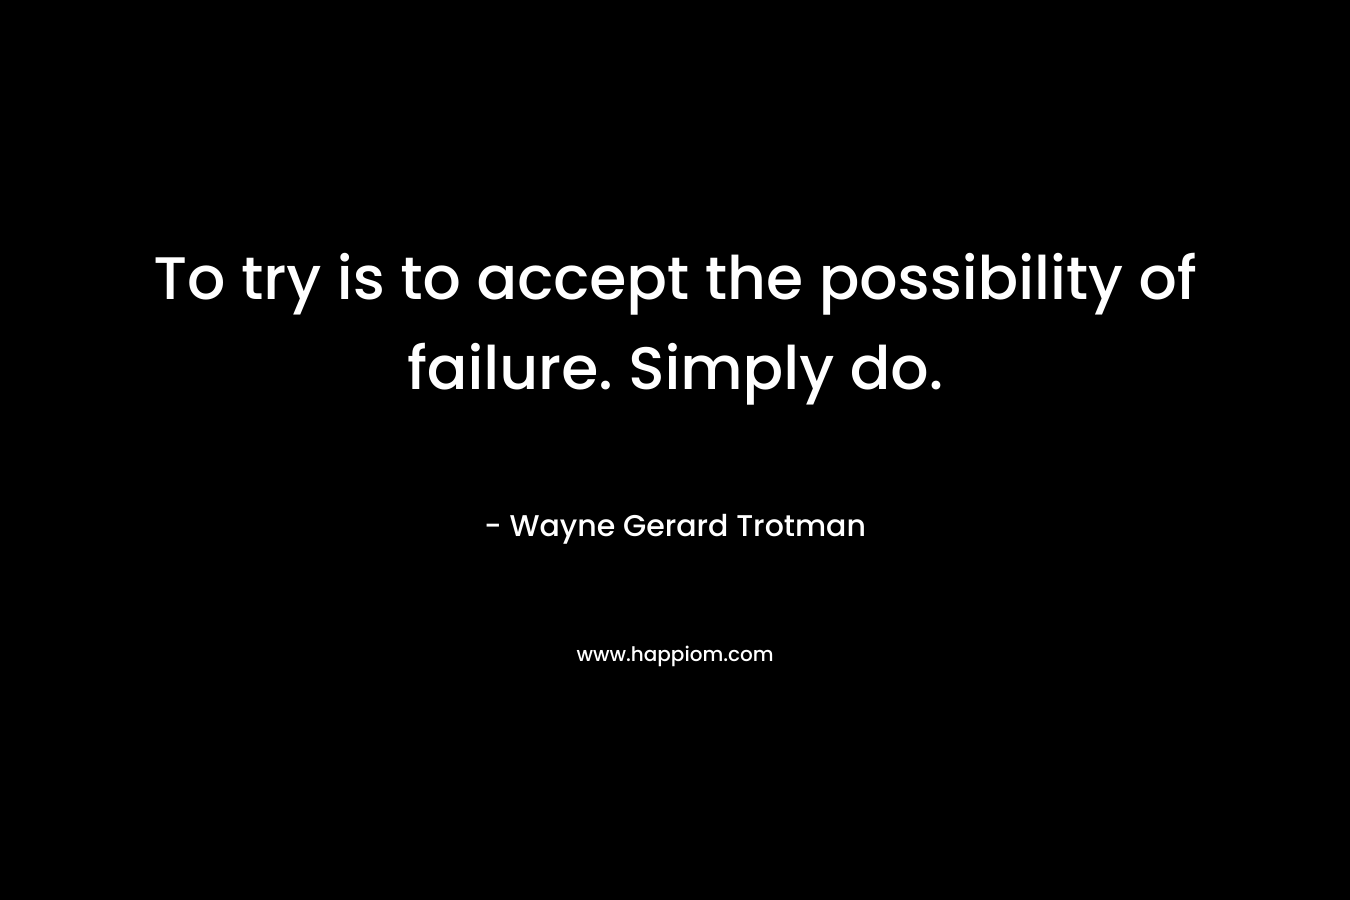 To try is to accept the possibility of failure. Simply do.